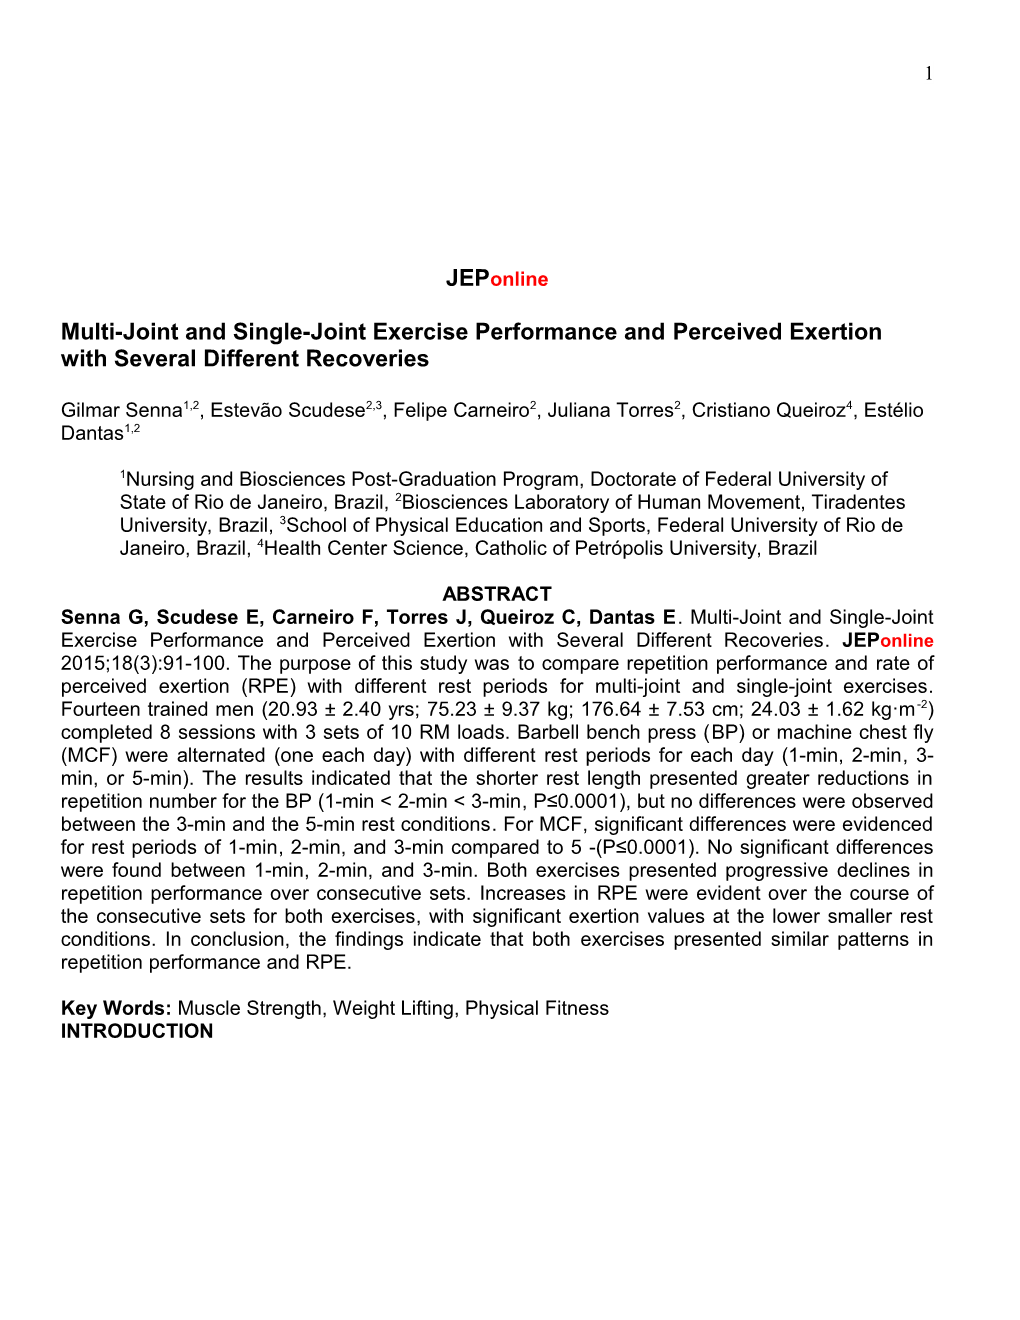 Multi-Joint and Single-Joint Exercise Performance Andperceived Exertionwith Several Different